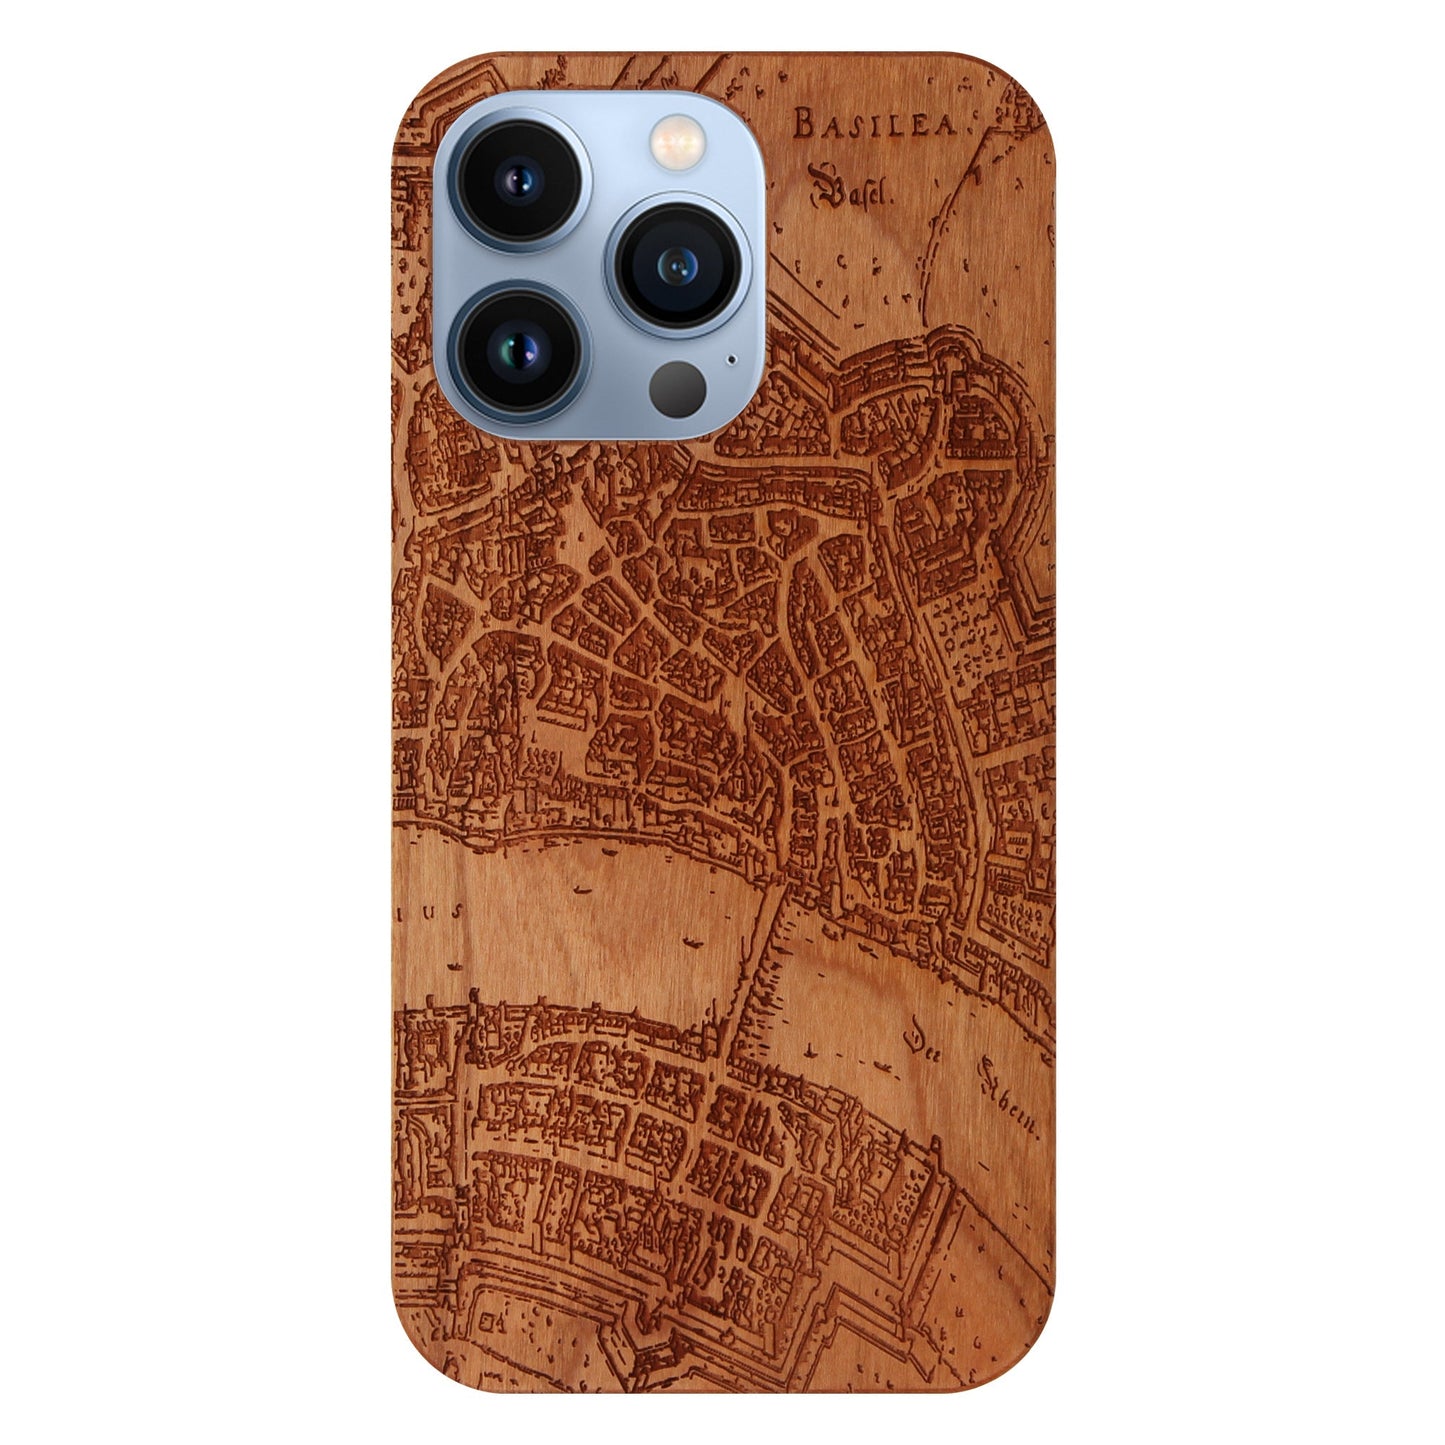 Basel Merian Eden case made of cherry wood for iPhone 13 Pro